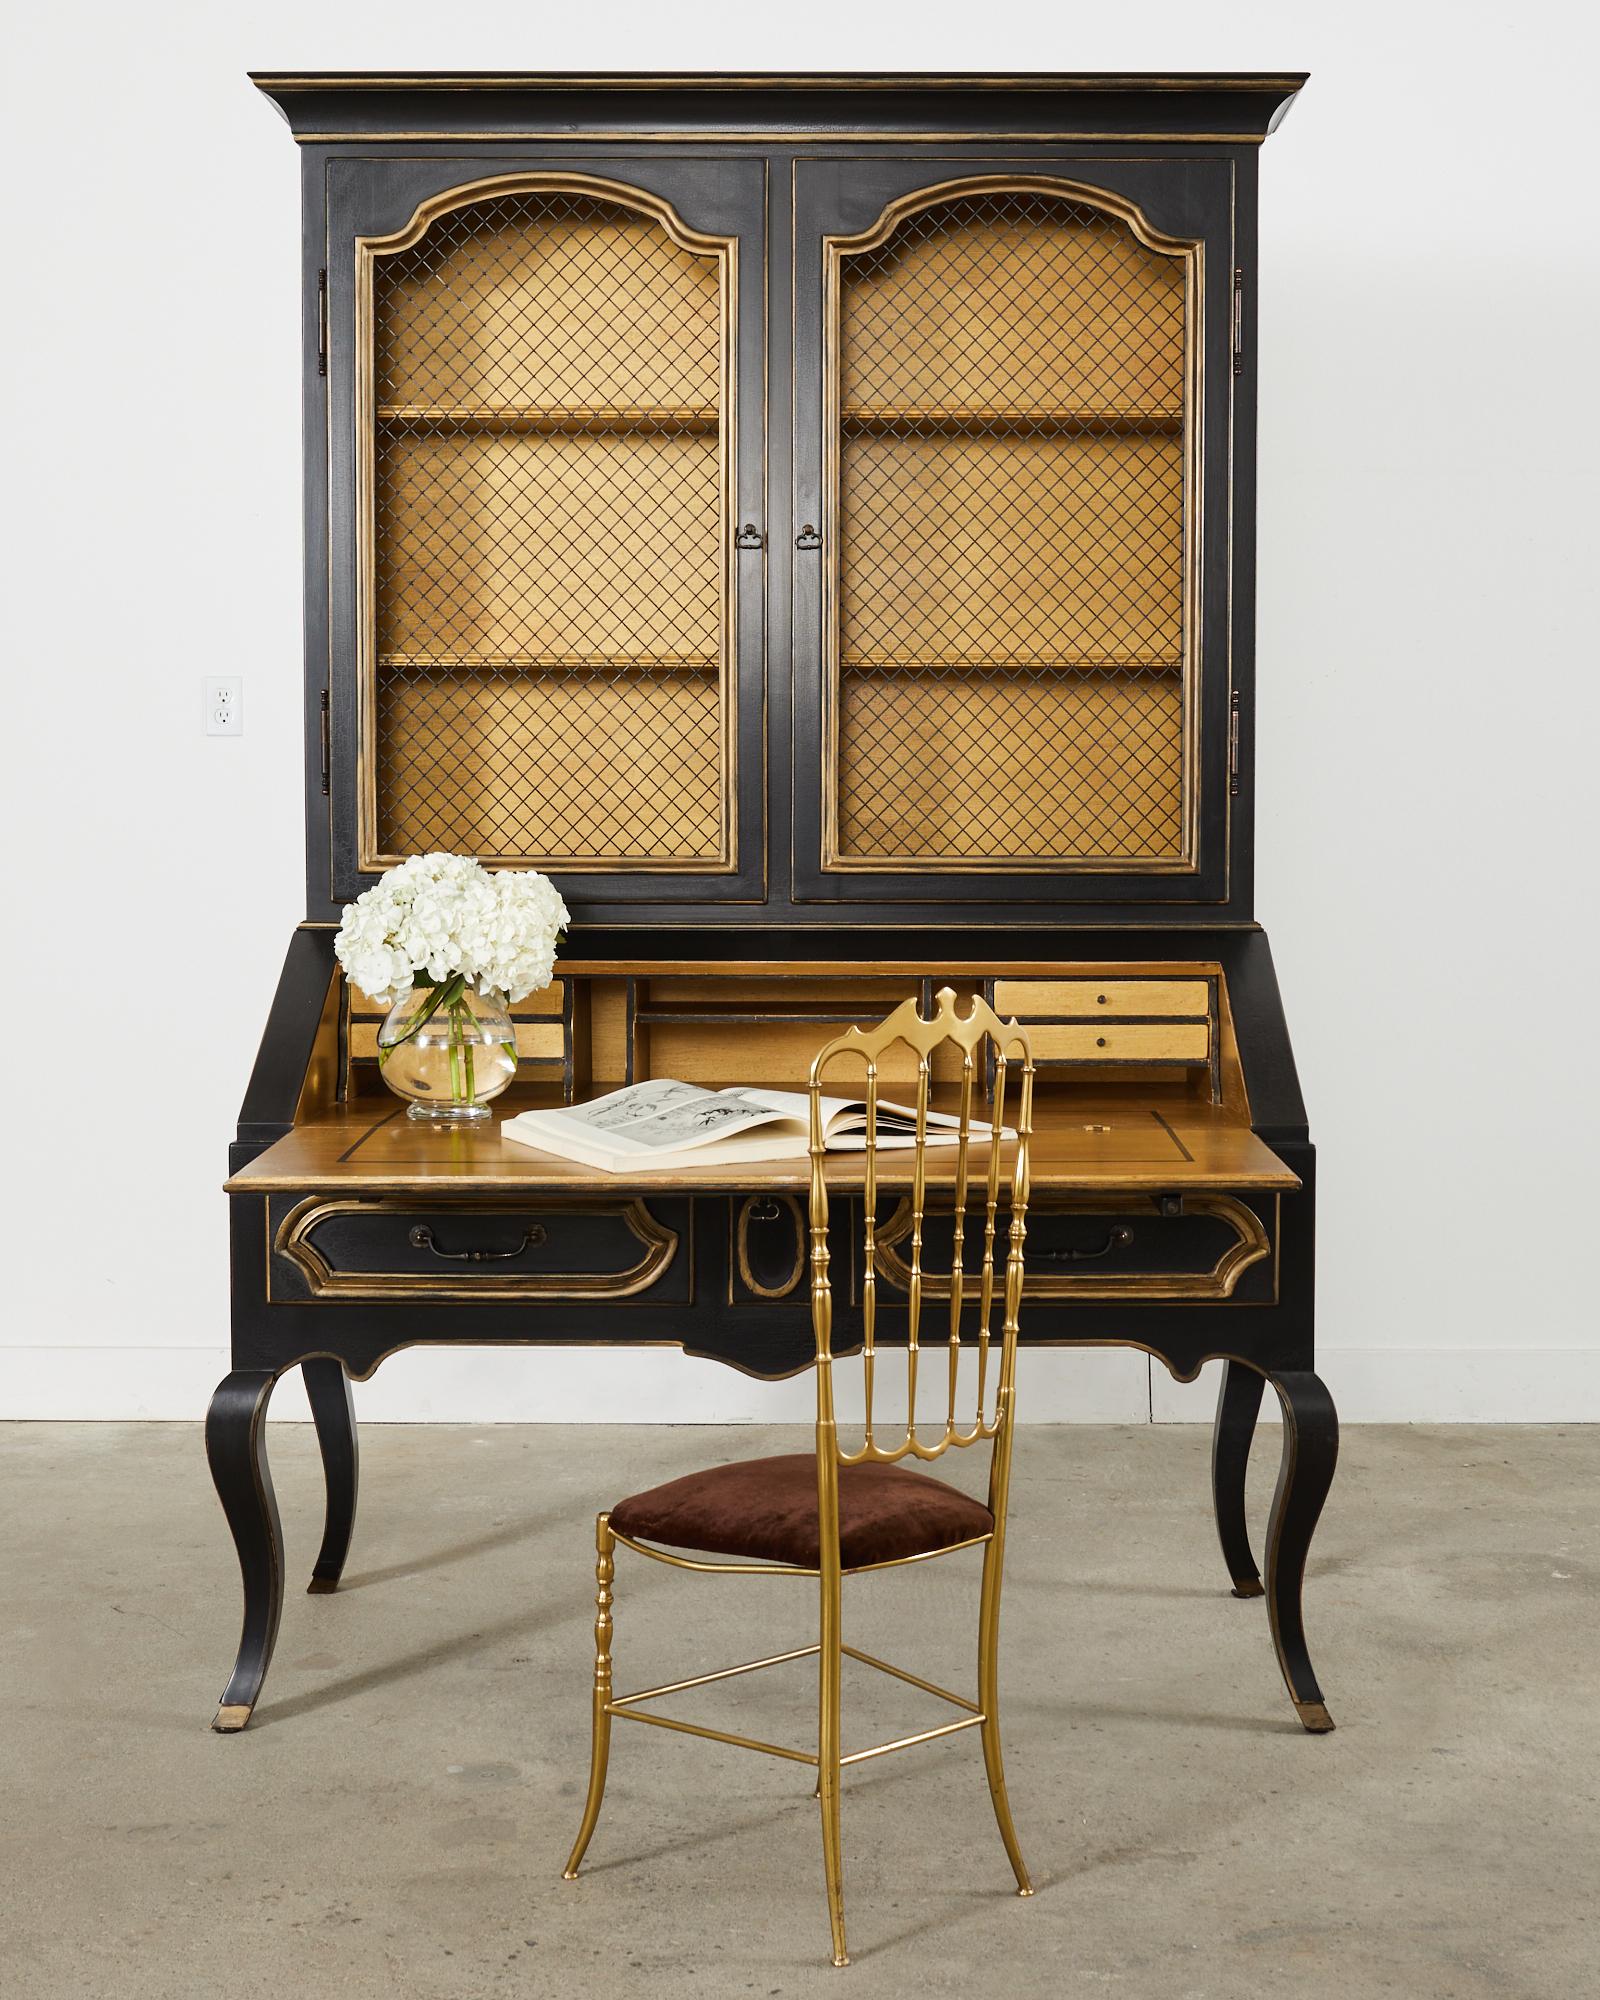 Dramatic secretaire bookcase or bibliotheque hand-crafted by Minton-Spindell Los Angeles, CA. The two-part case features an ebonized lacquer finish with parcel gilt accents. The lacquer has a desirable aged patina with craquelure. The secretaire is